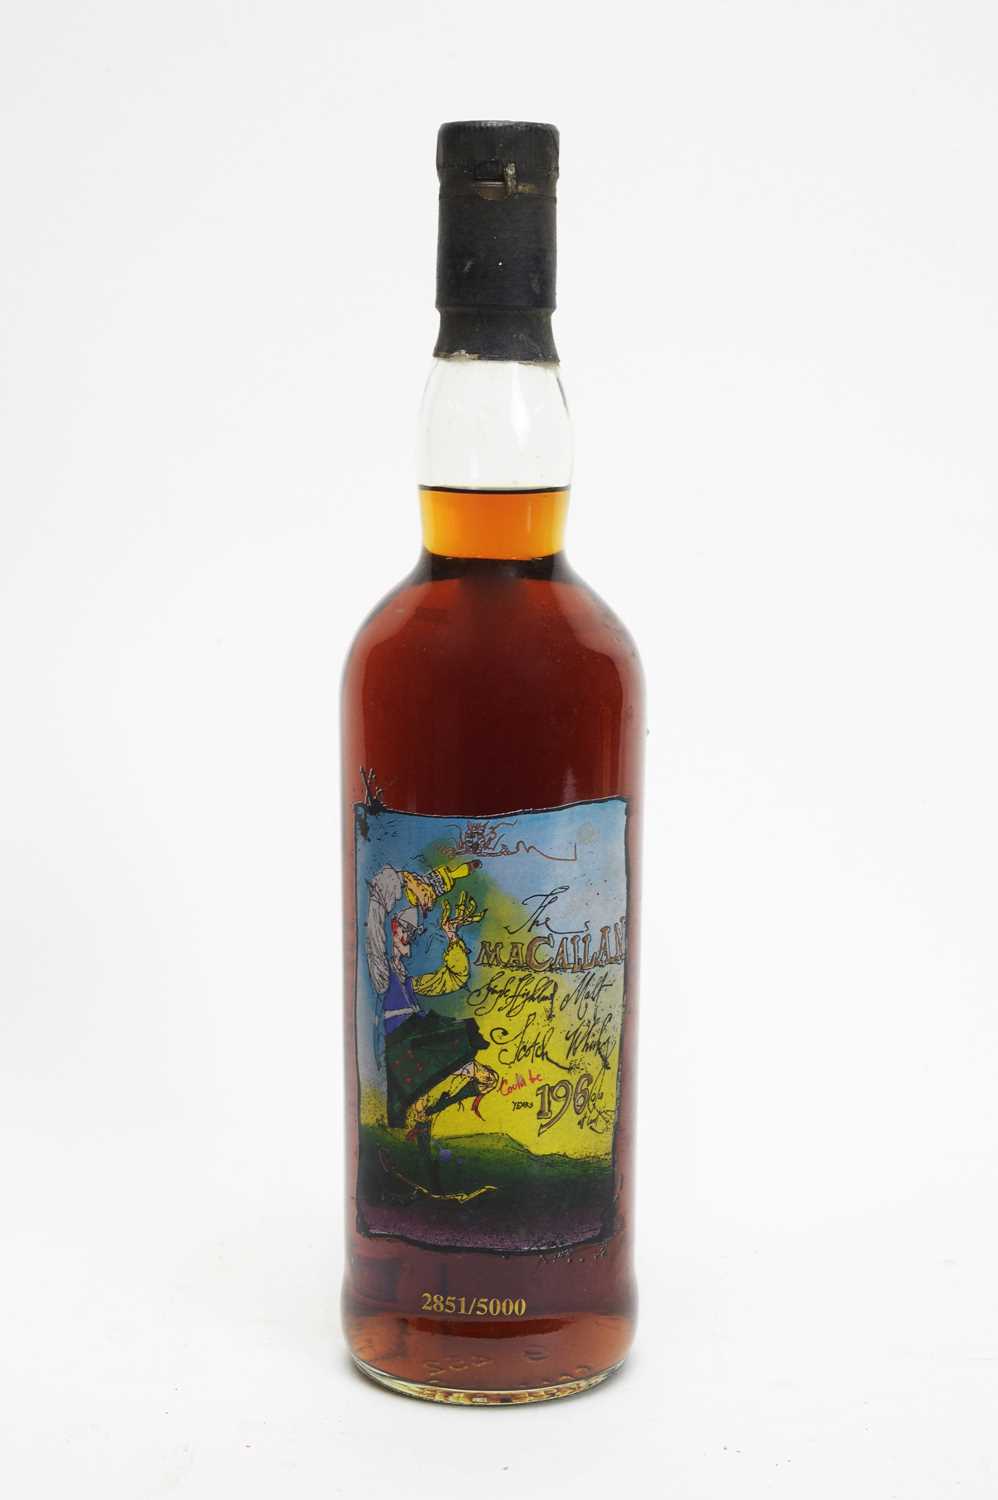 Lot 409 - Macallan Single Highland Malt Scotch Whisky Could be 196 Years Old